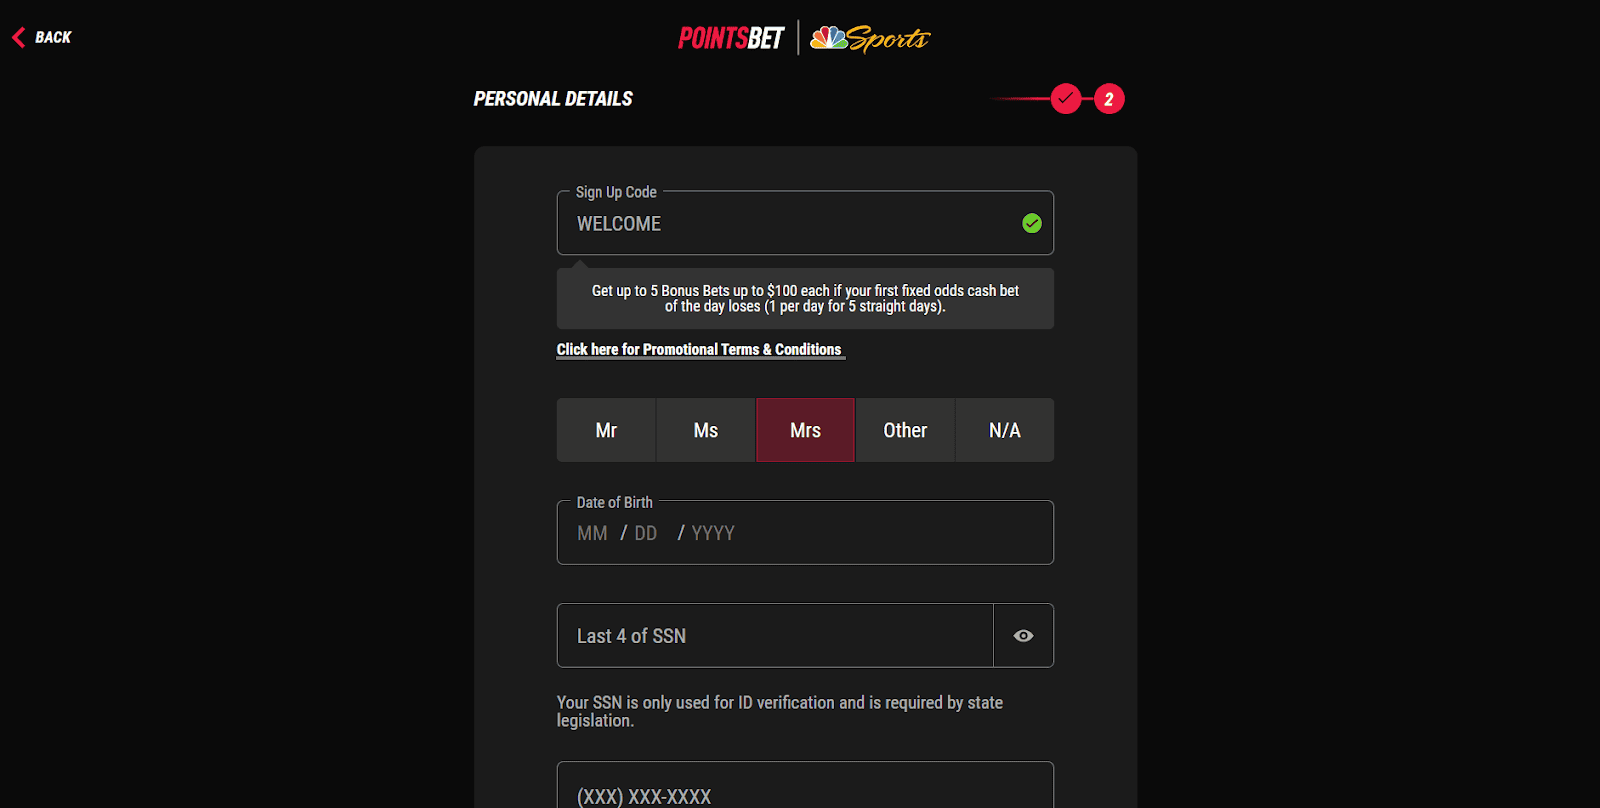 How to Sign Up at PointsBet